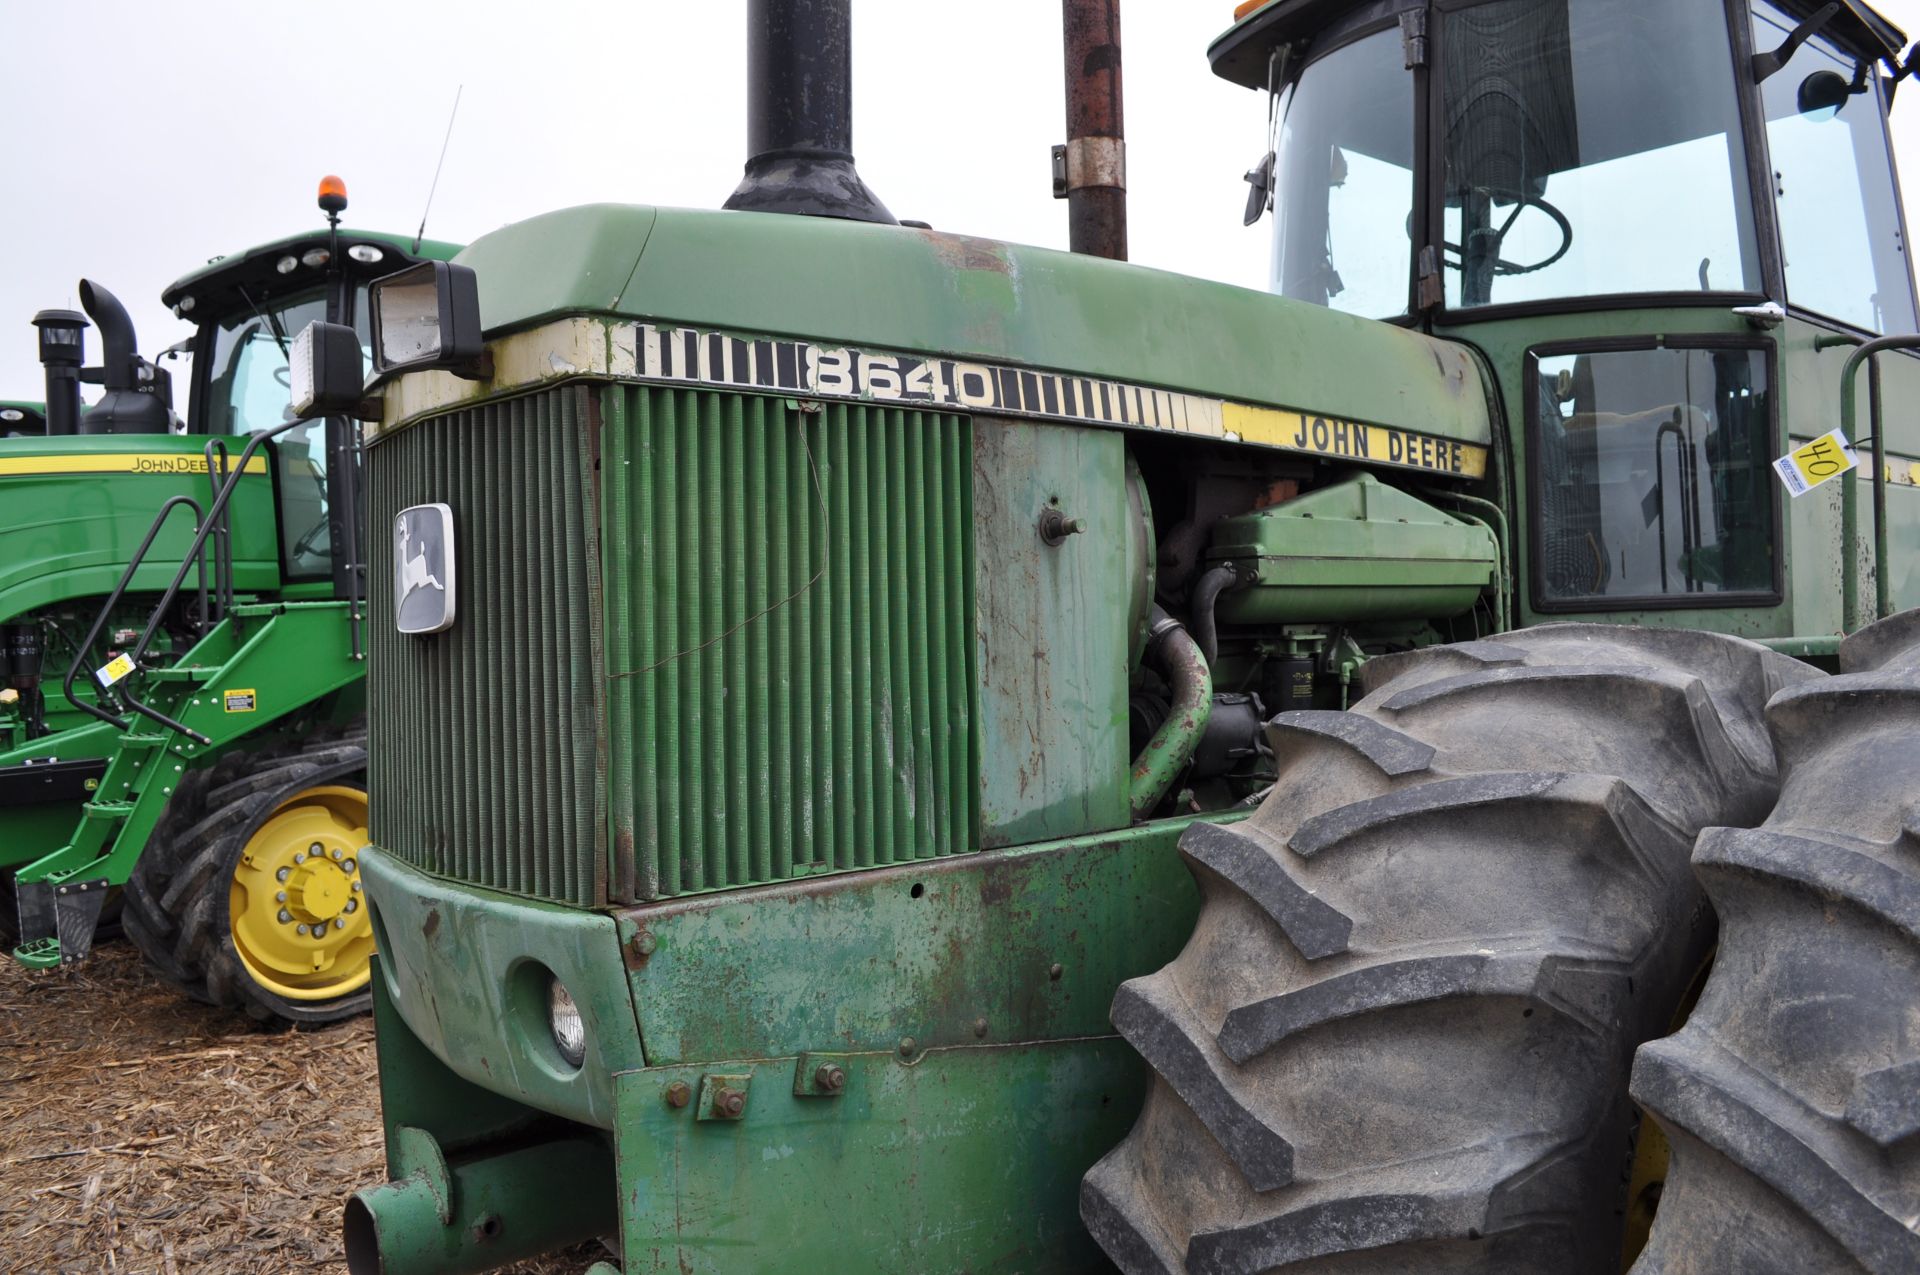 John Deere 8630 4WD tractor, 23.1-30 duals, 3 hyd remotes, 3 pt, quick hitch, 1000 PTO - Image 18 of 30